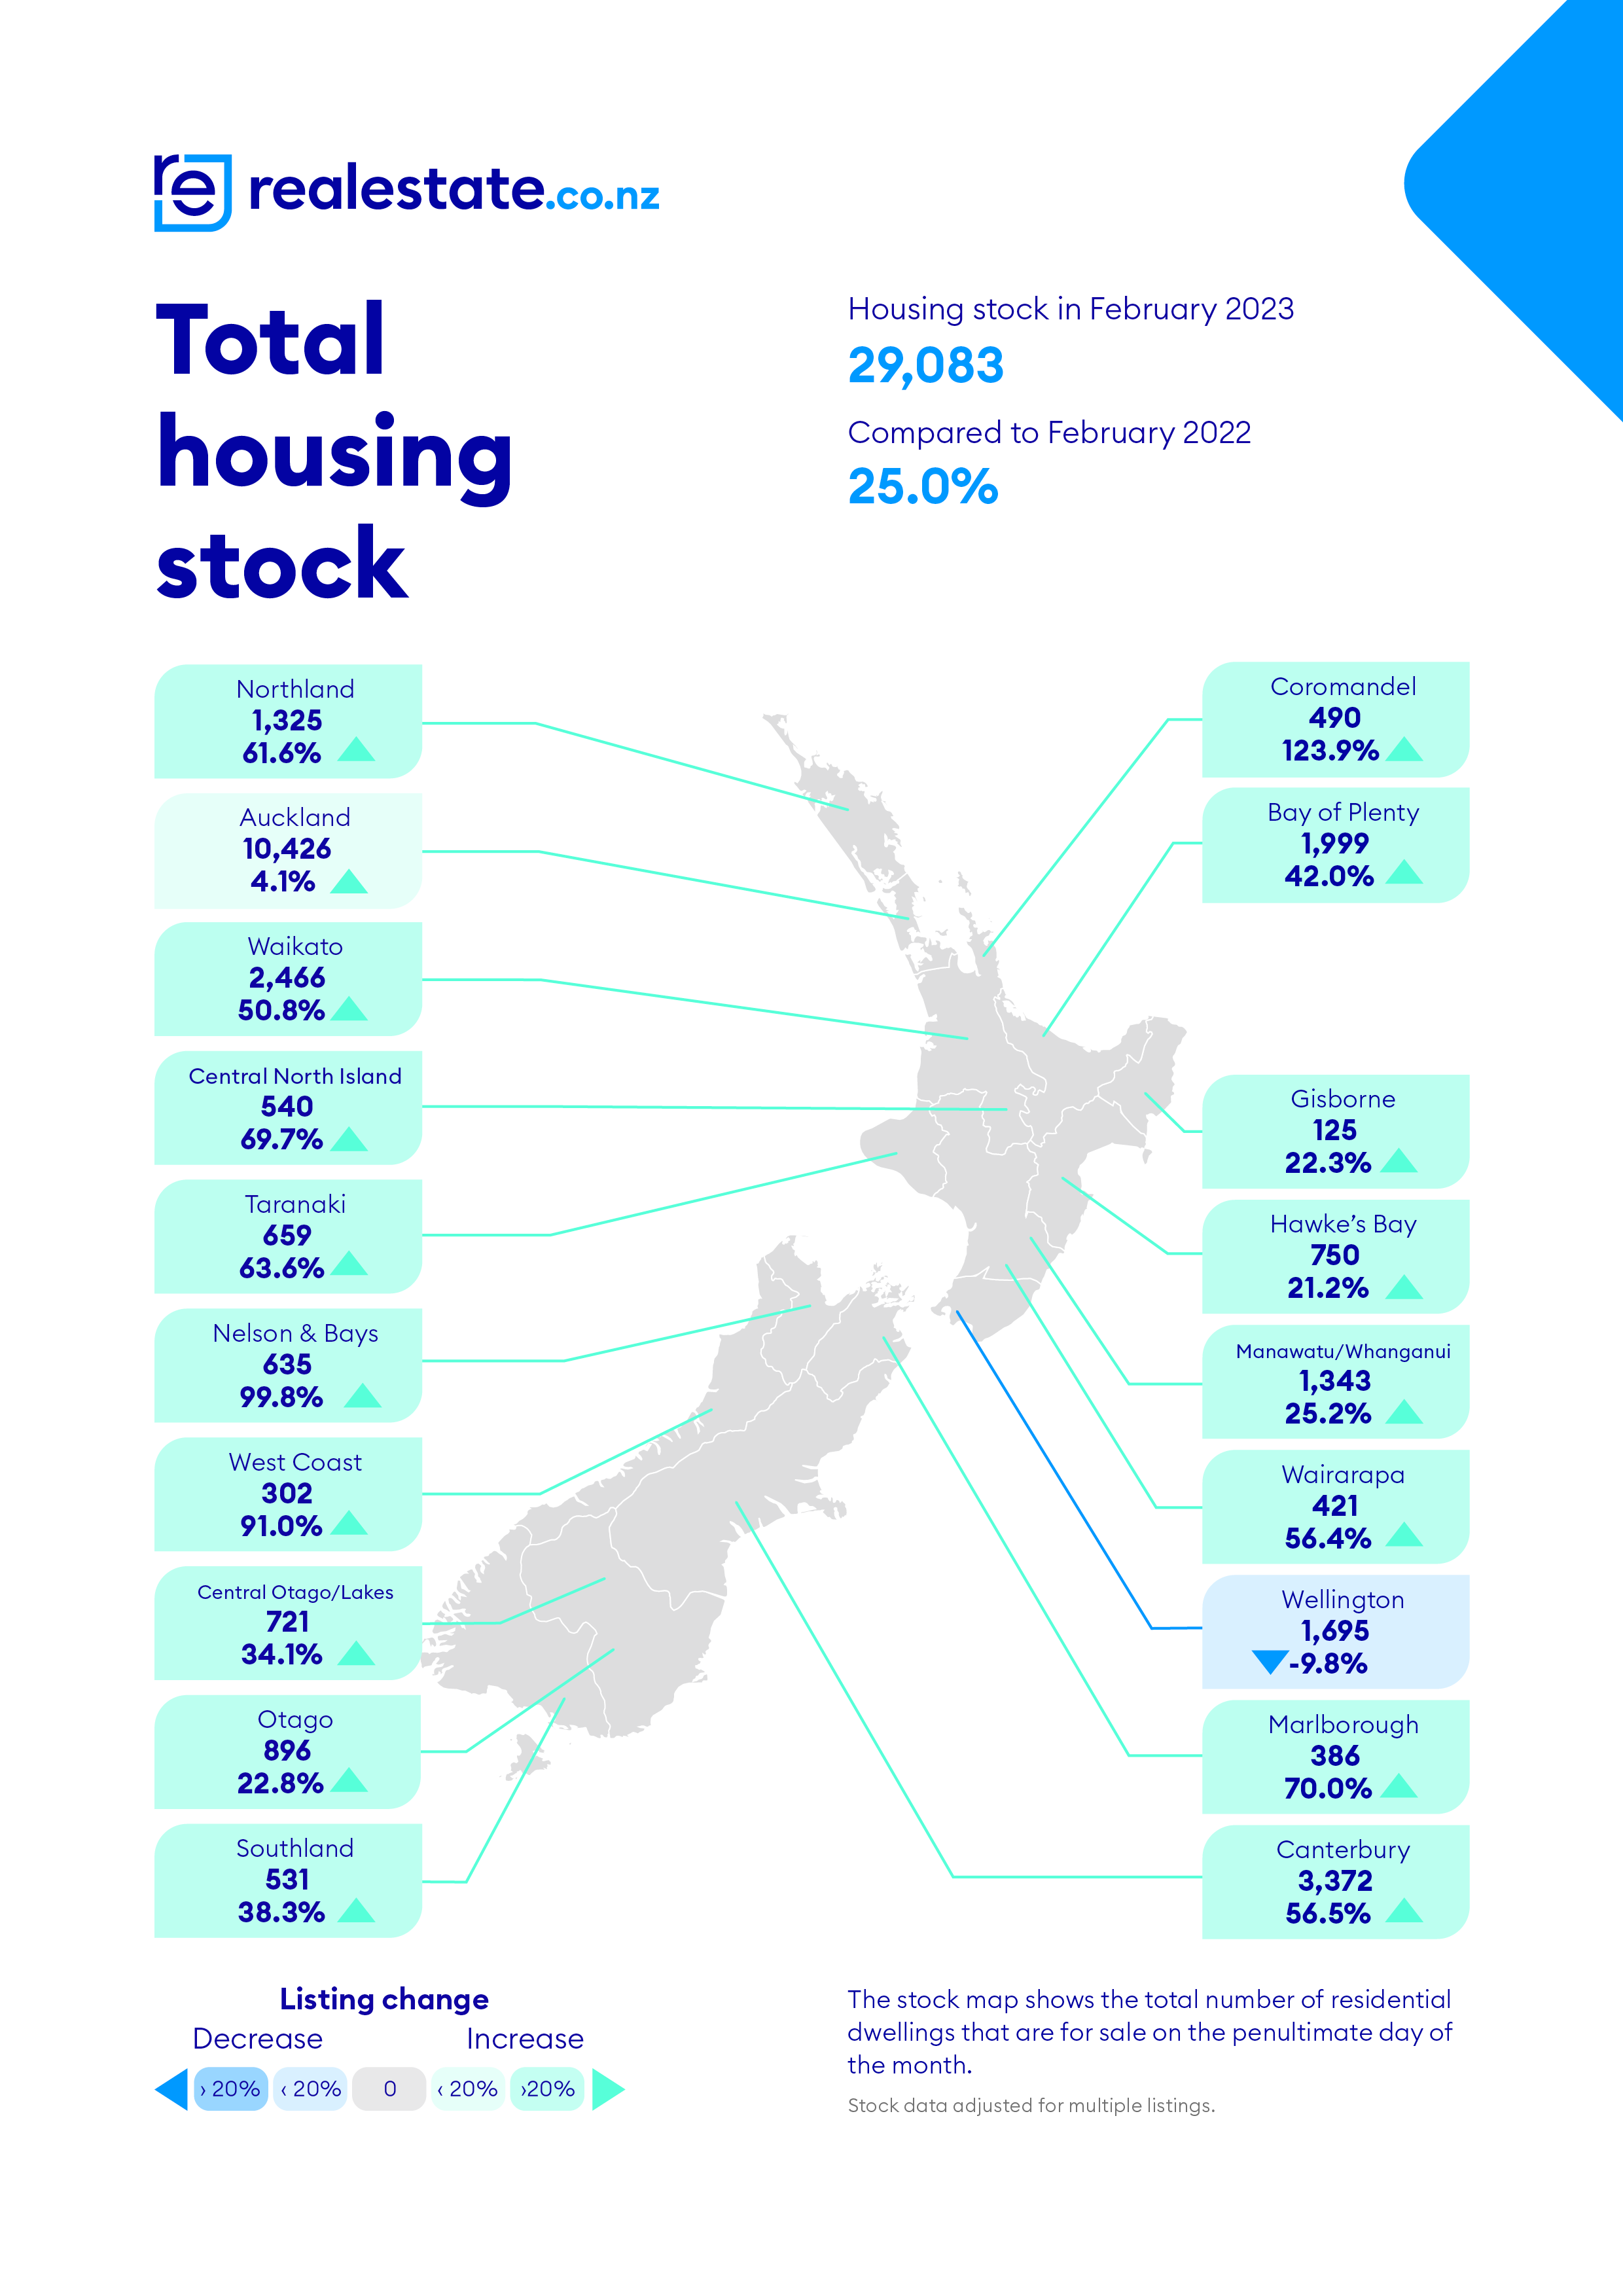 Stock realestate.co.nz Feb 23